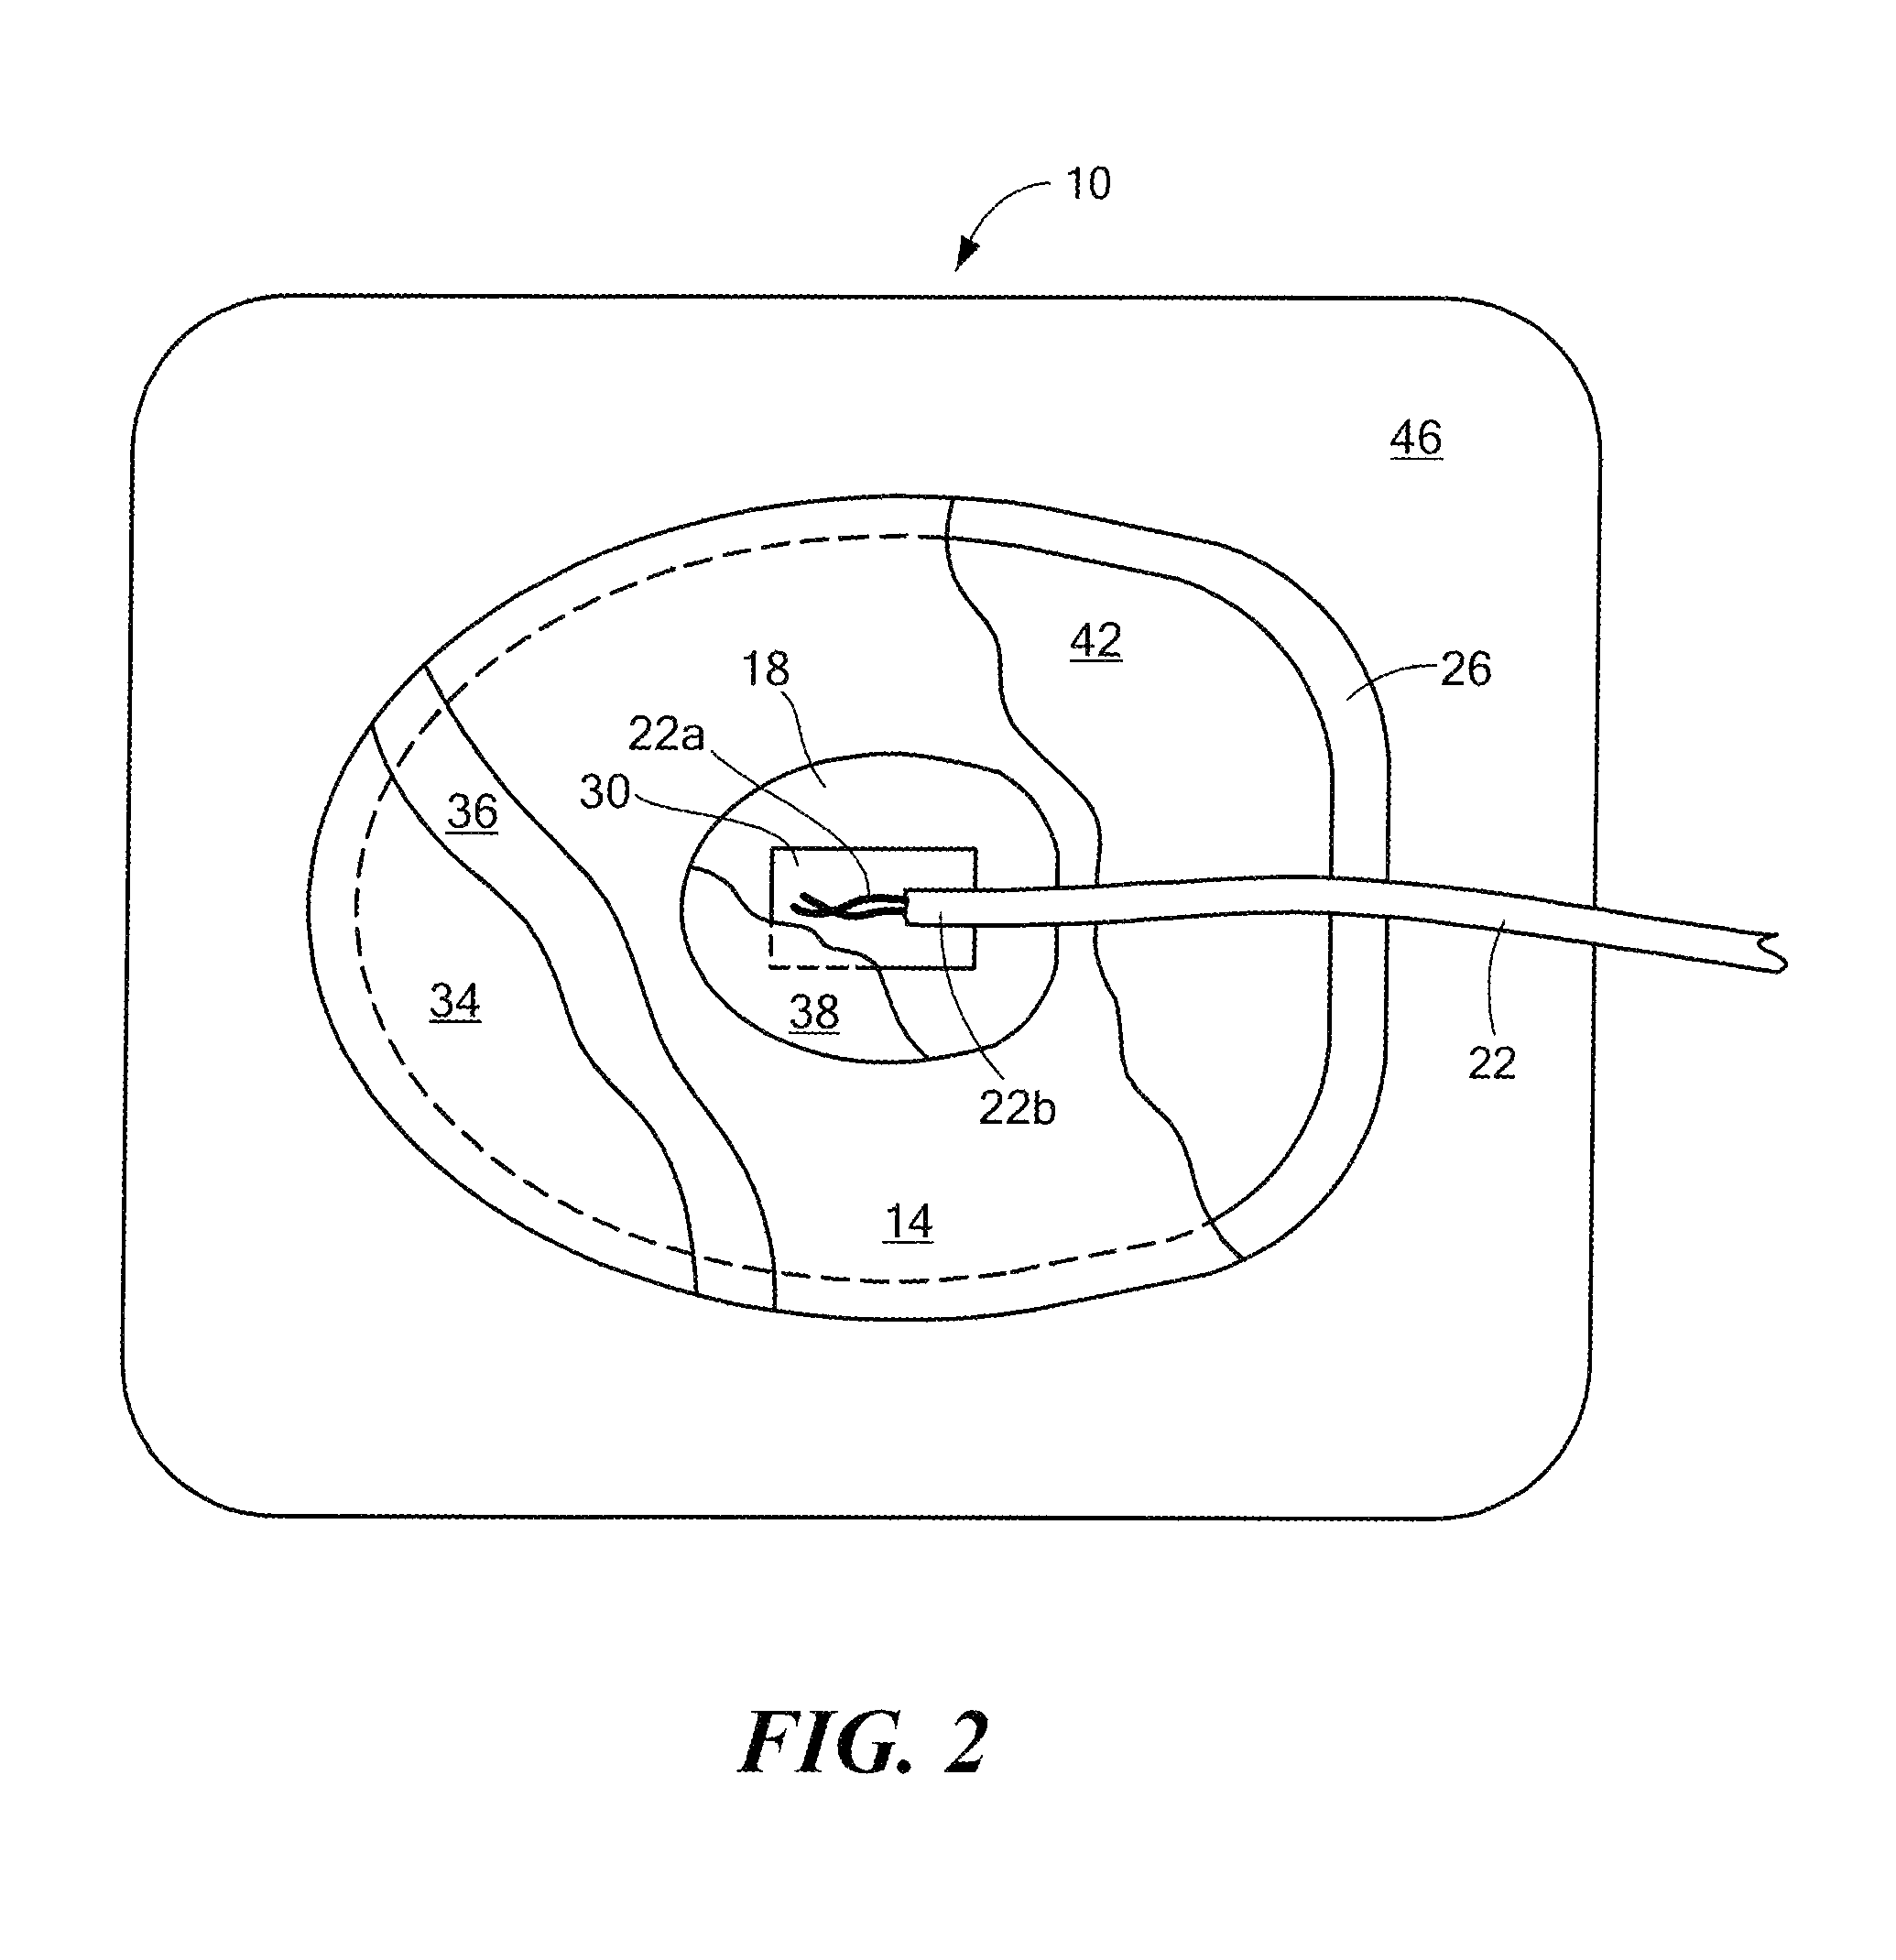 Apparatus and method for energy distribution in a medical electrode